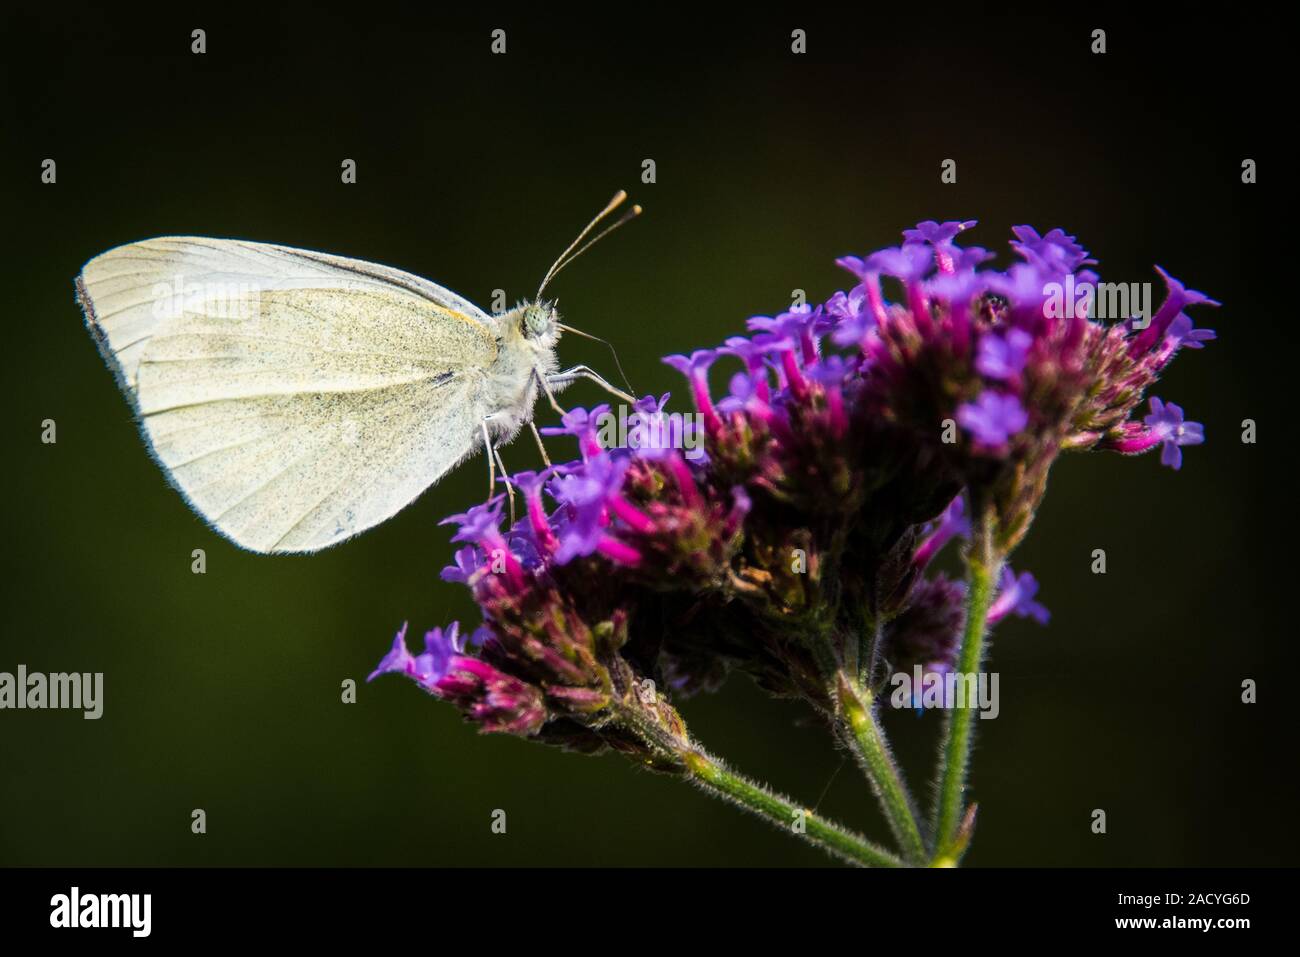 Adult Small White butterfly (Pieris rapae) on a purple flower in the summertime Stock Photo